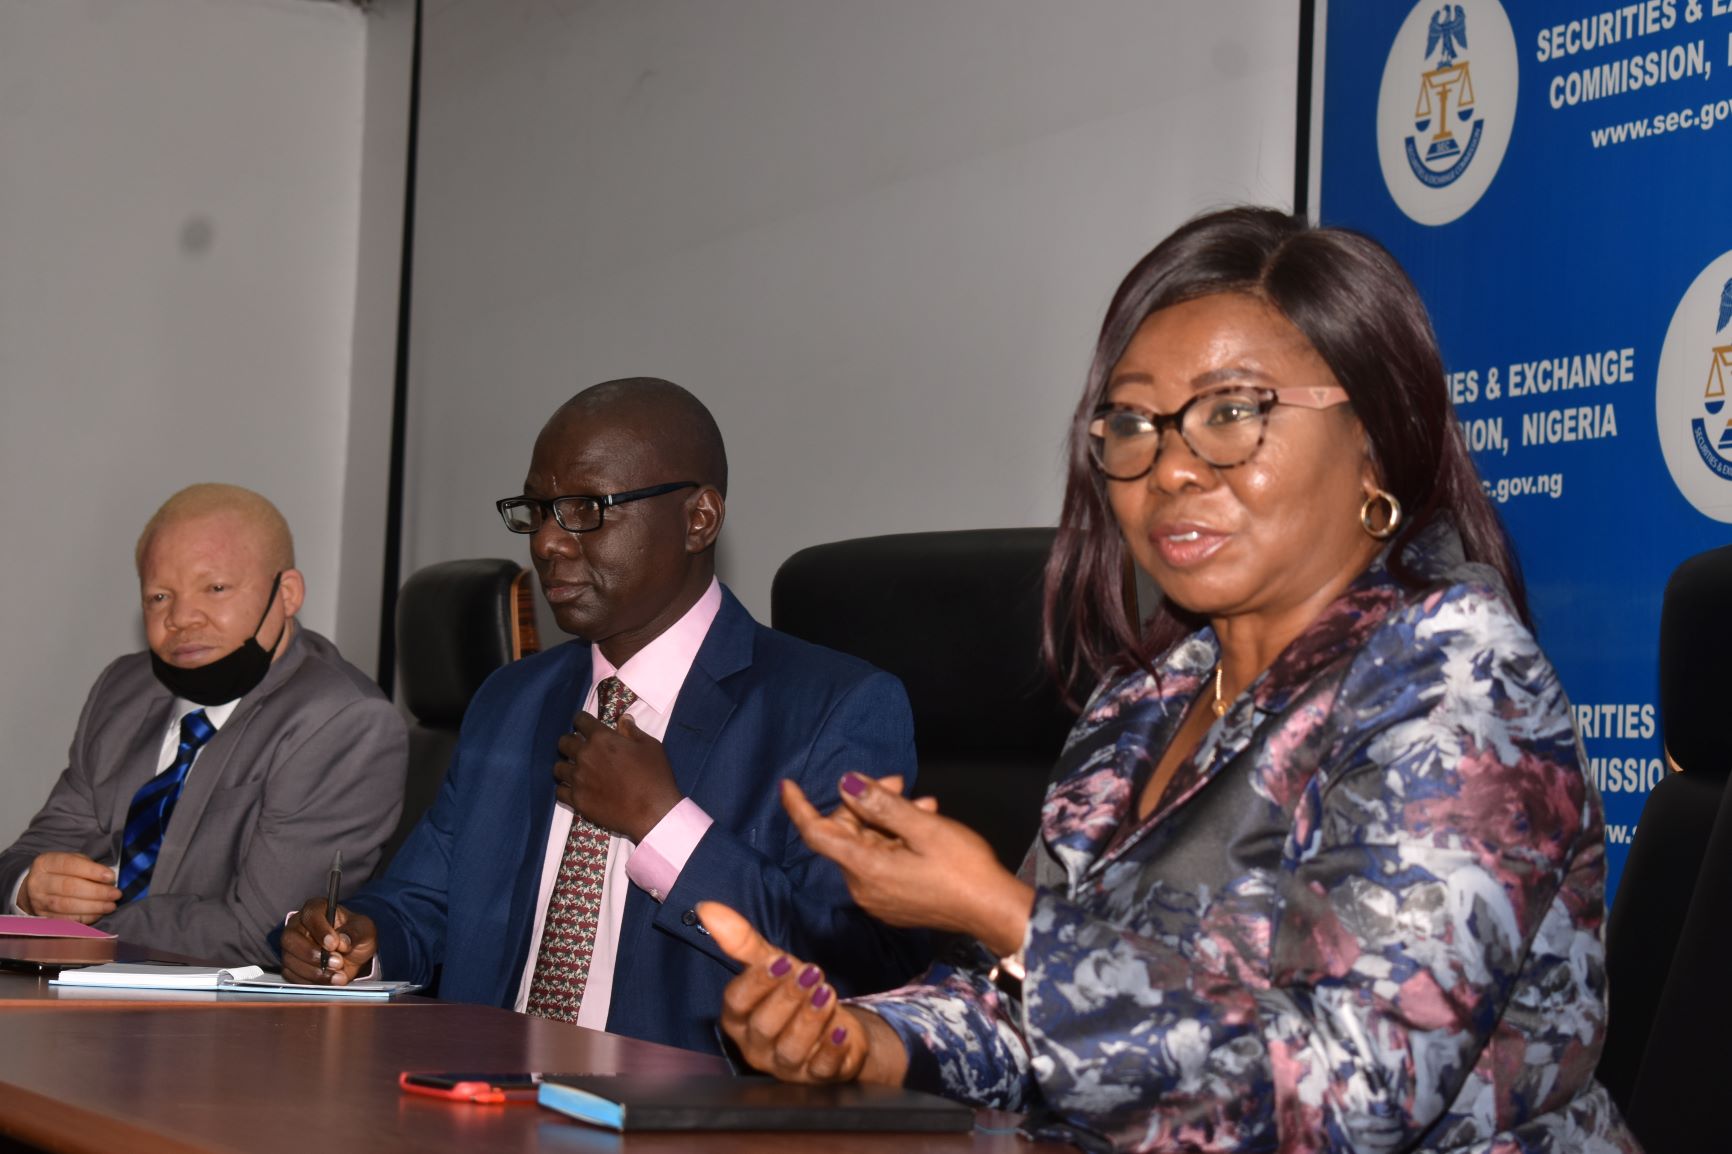 L-R, Acting Executive Commissioner Legal and Enforcement  Securities and Exchange Commission , Mr. Reginald Karawusa, Acting Executive Commissioner, Operations, SEC  Mr Isyaku Tilde and Acting Director General SEC  Ms Mary Uduk during a Meeting between Management of SEC and Staff in Abuja, Monday 